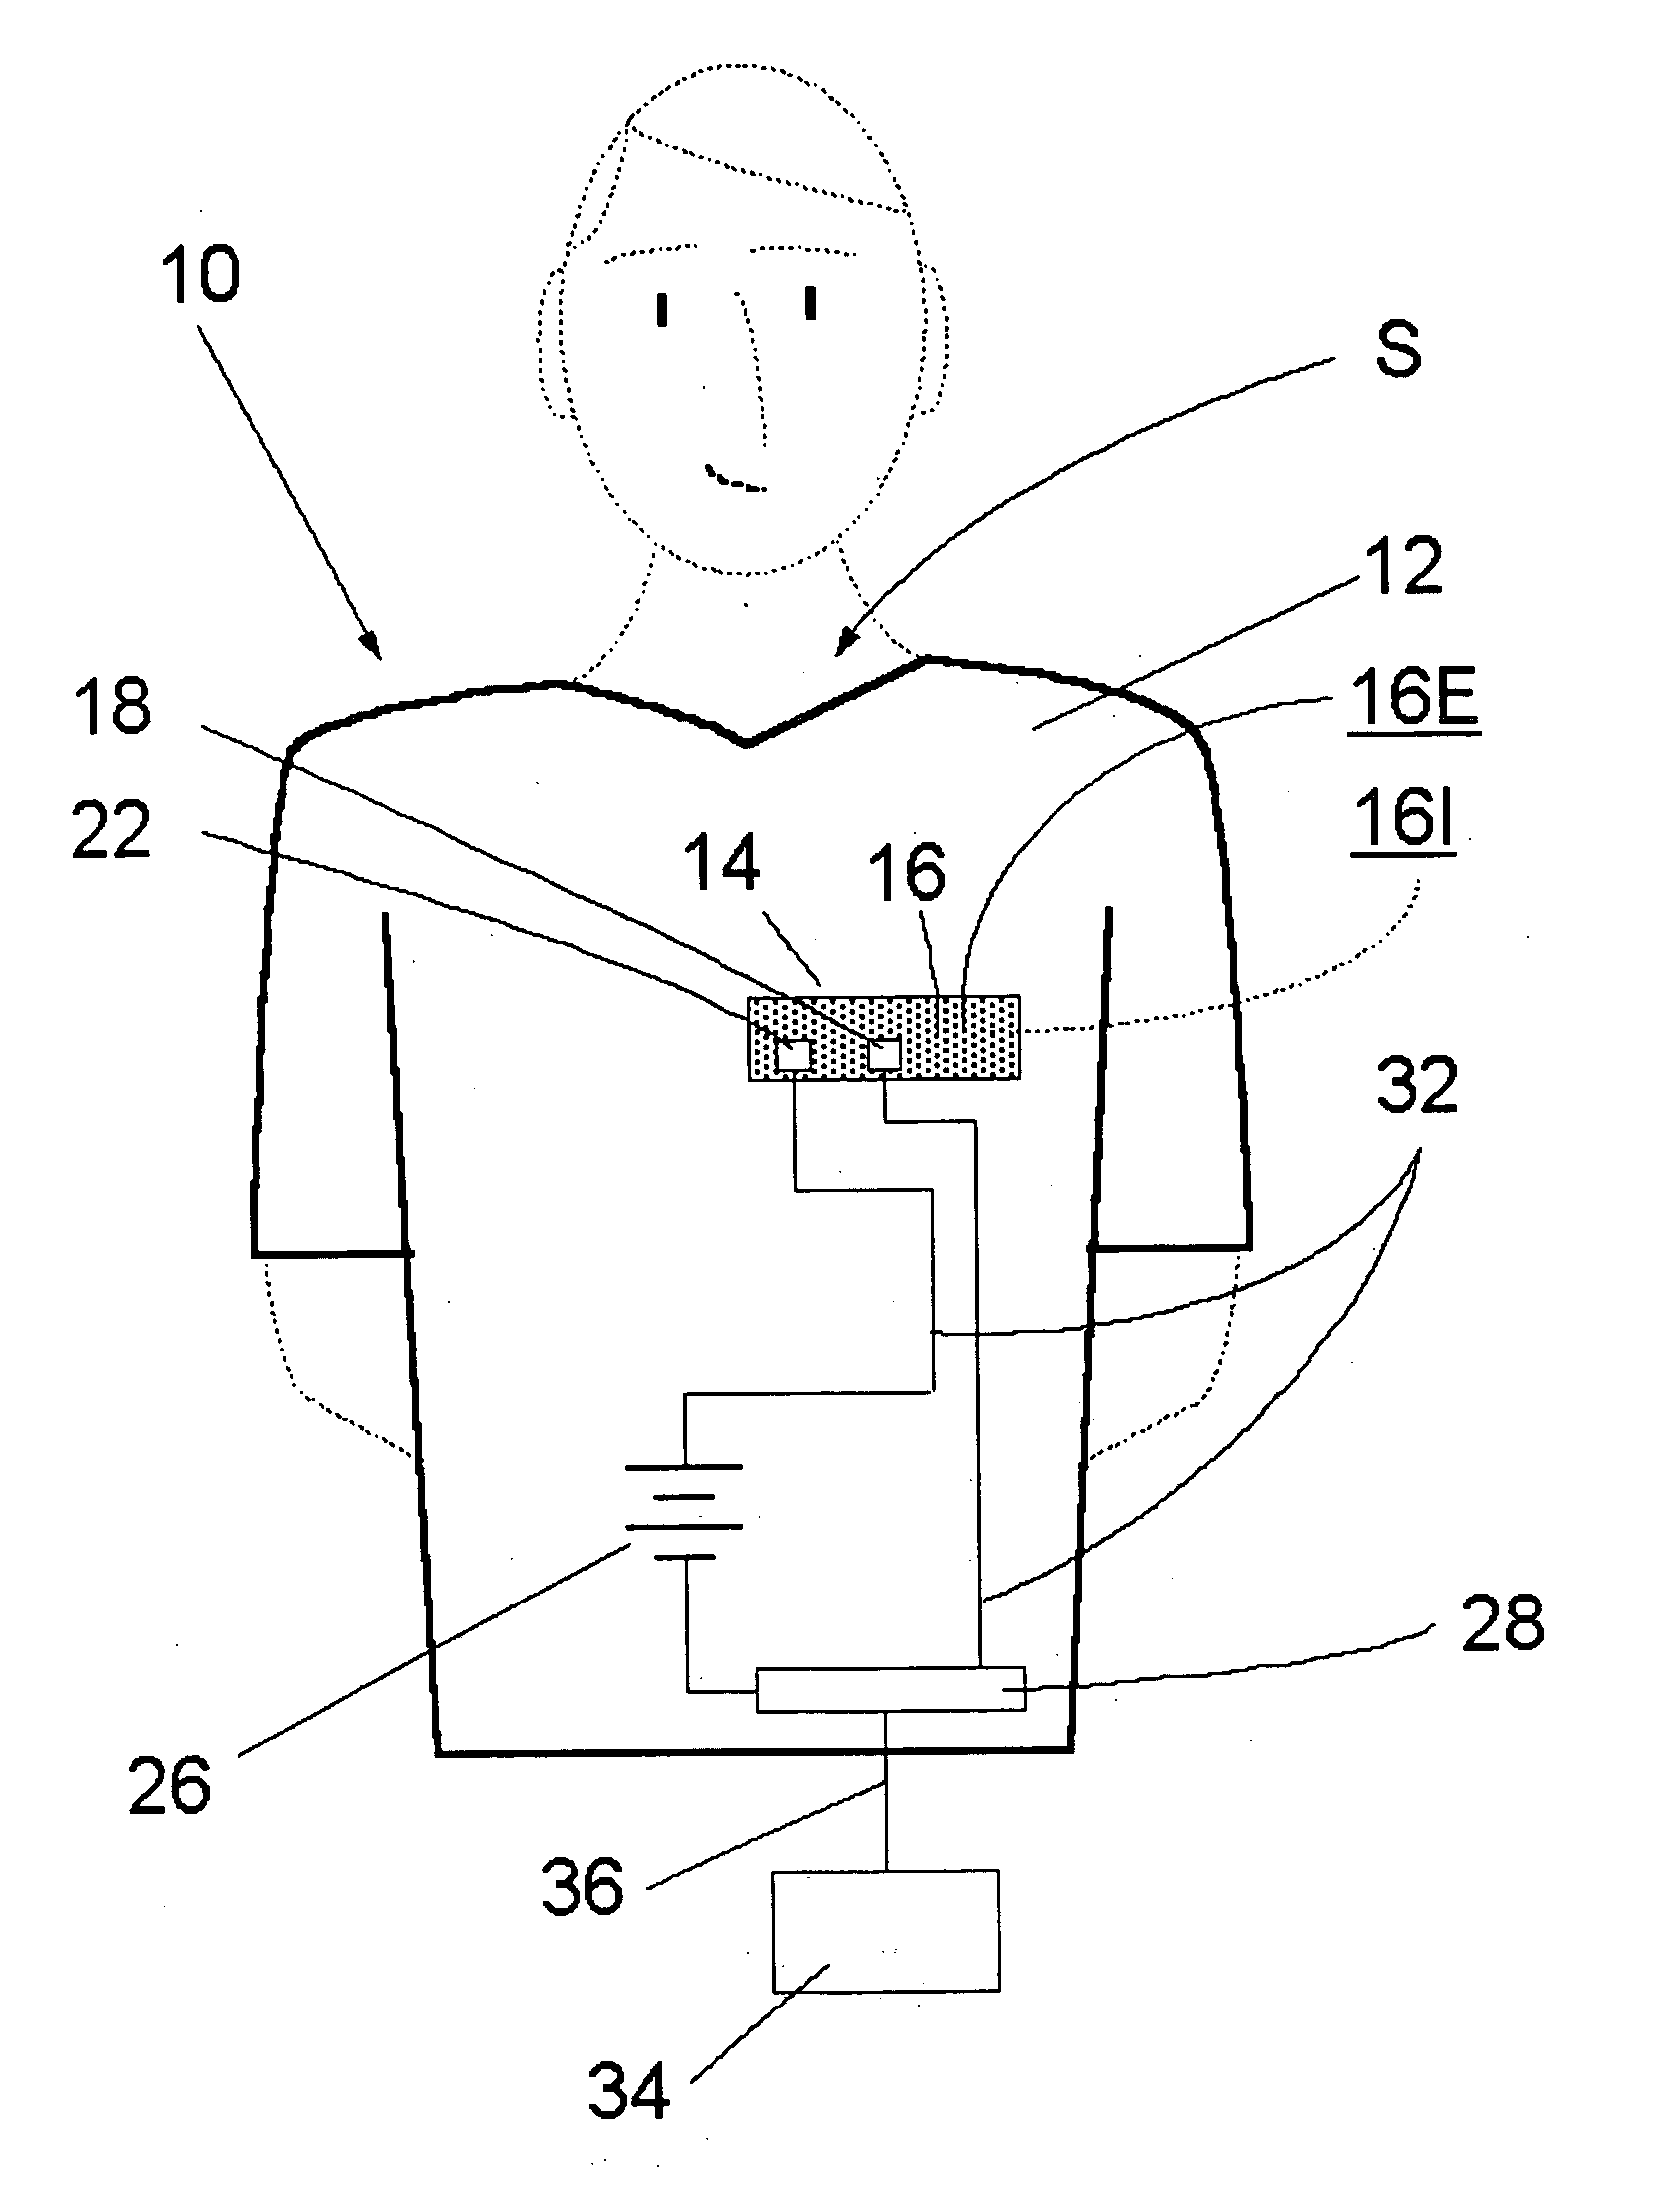 Extended optical range reflective system for monitoring motion of a member